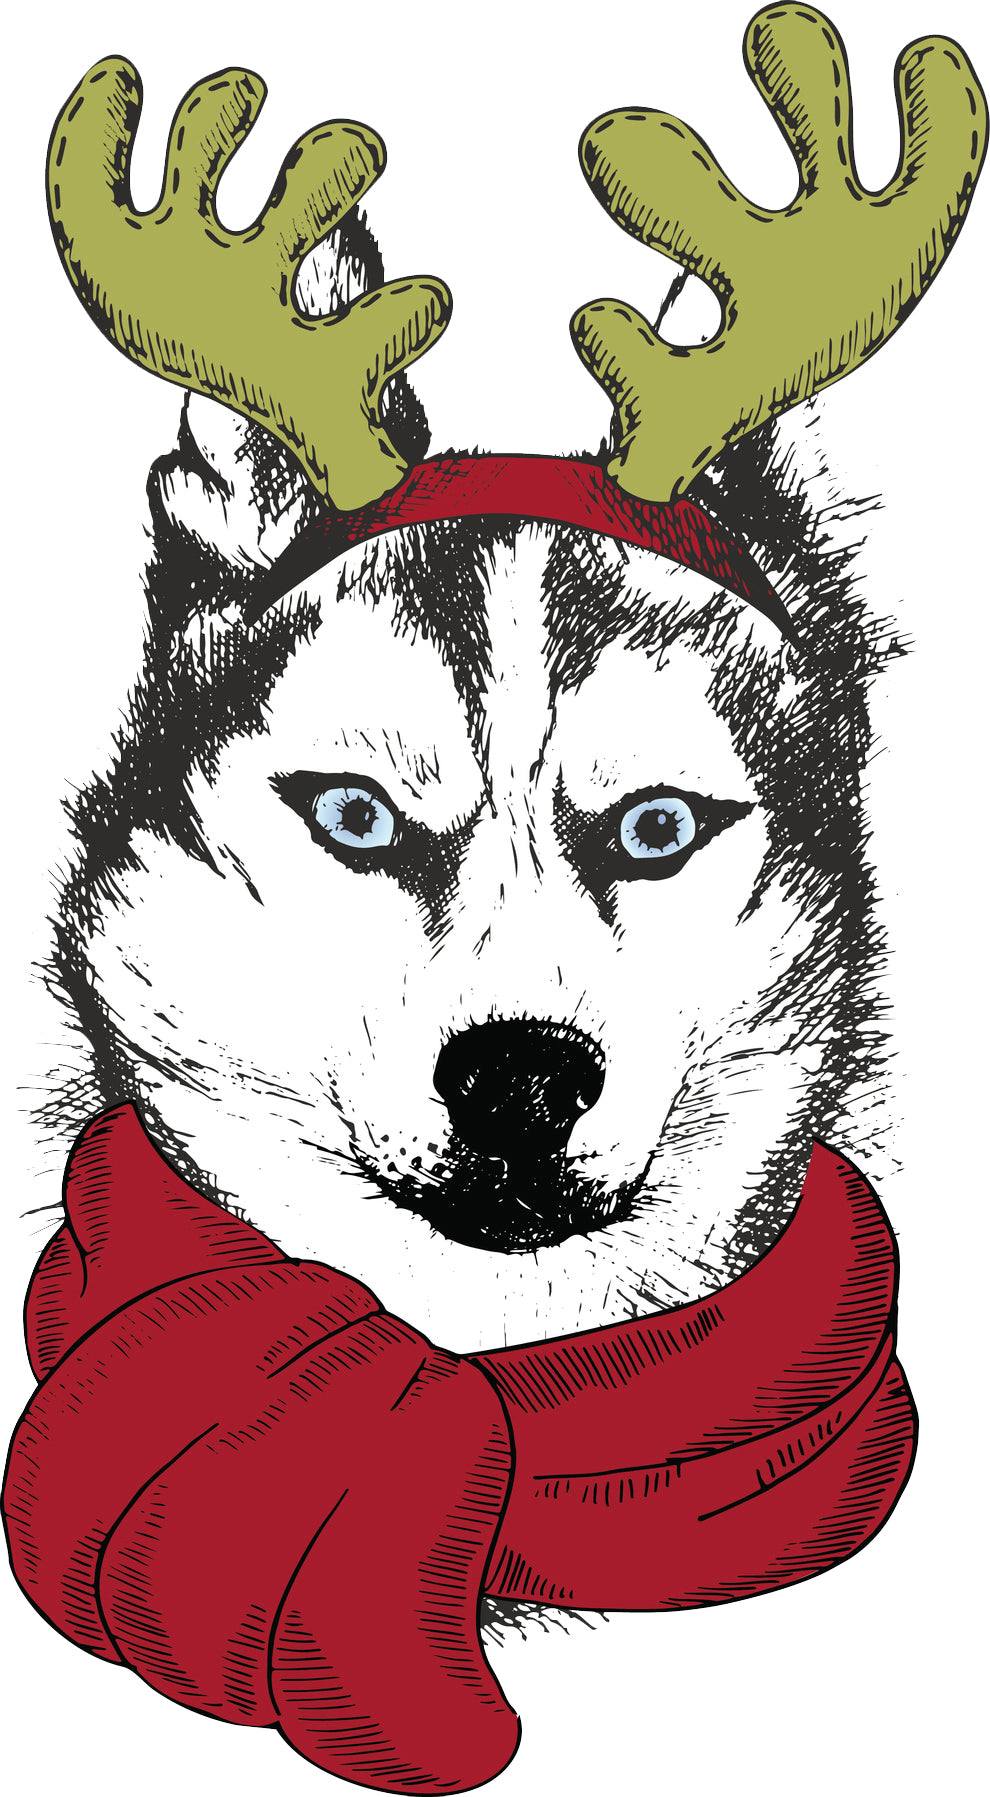 Adorable Merry Christmas Holiday Puppy Dog in Reindeer Costume - Husky Vinyl Decal Sticker